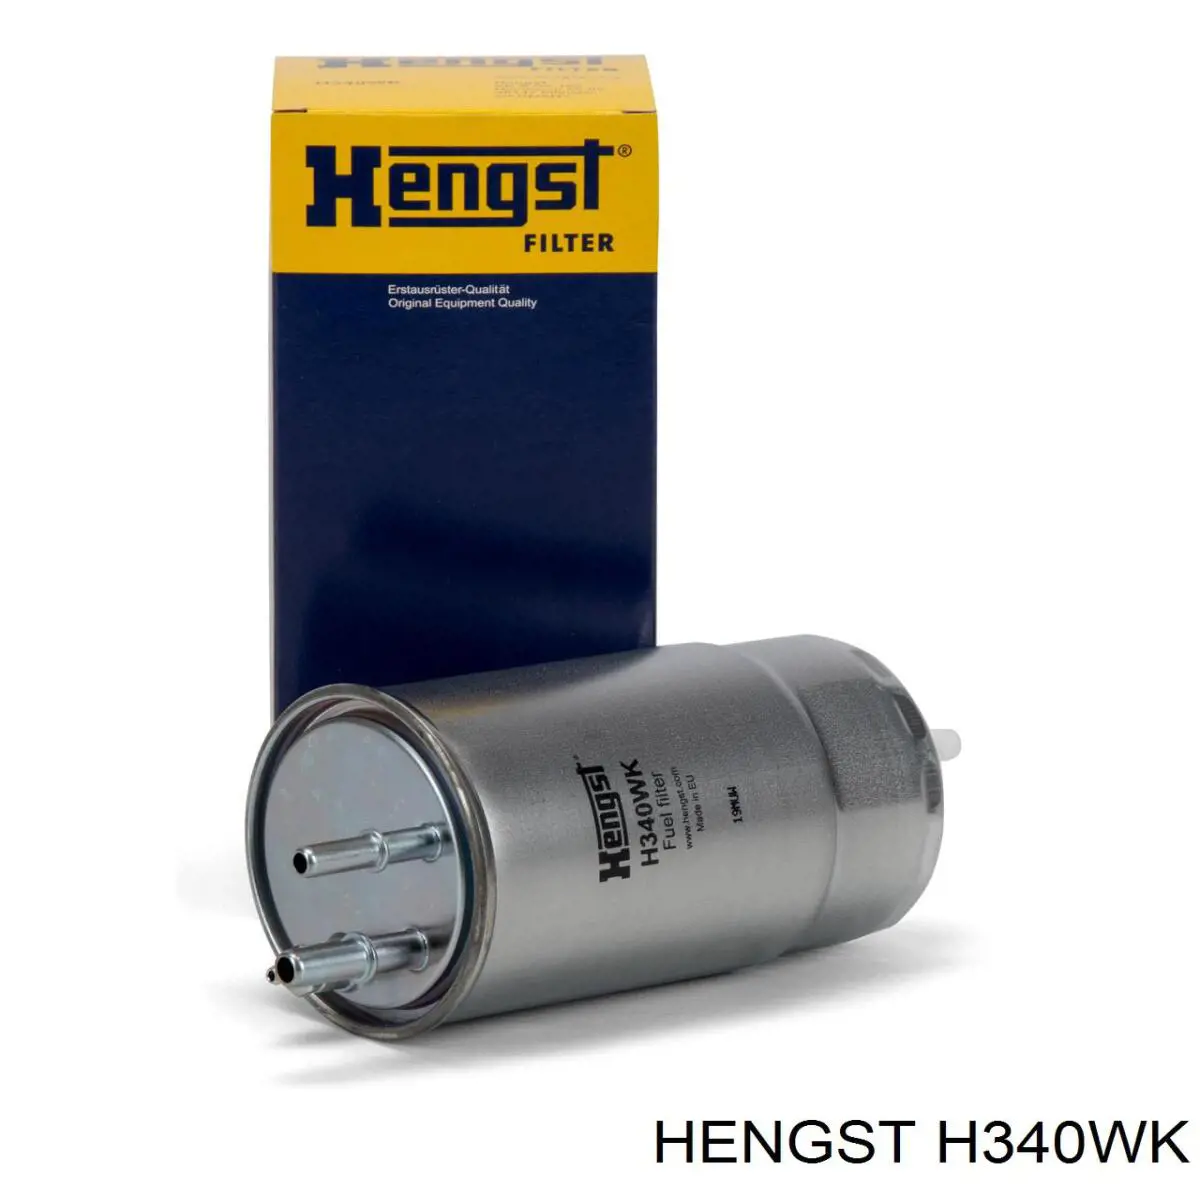 H340WK Hengst filtro combustible